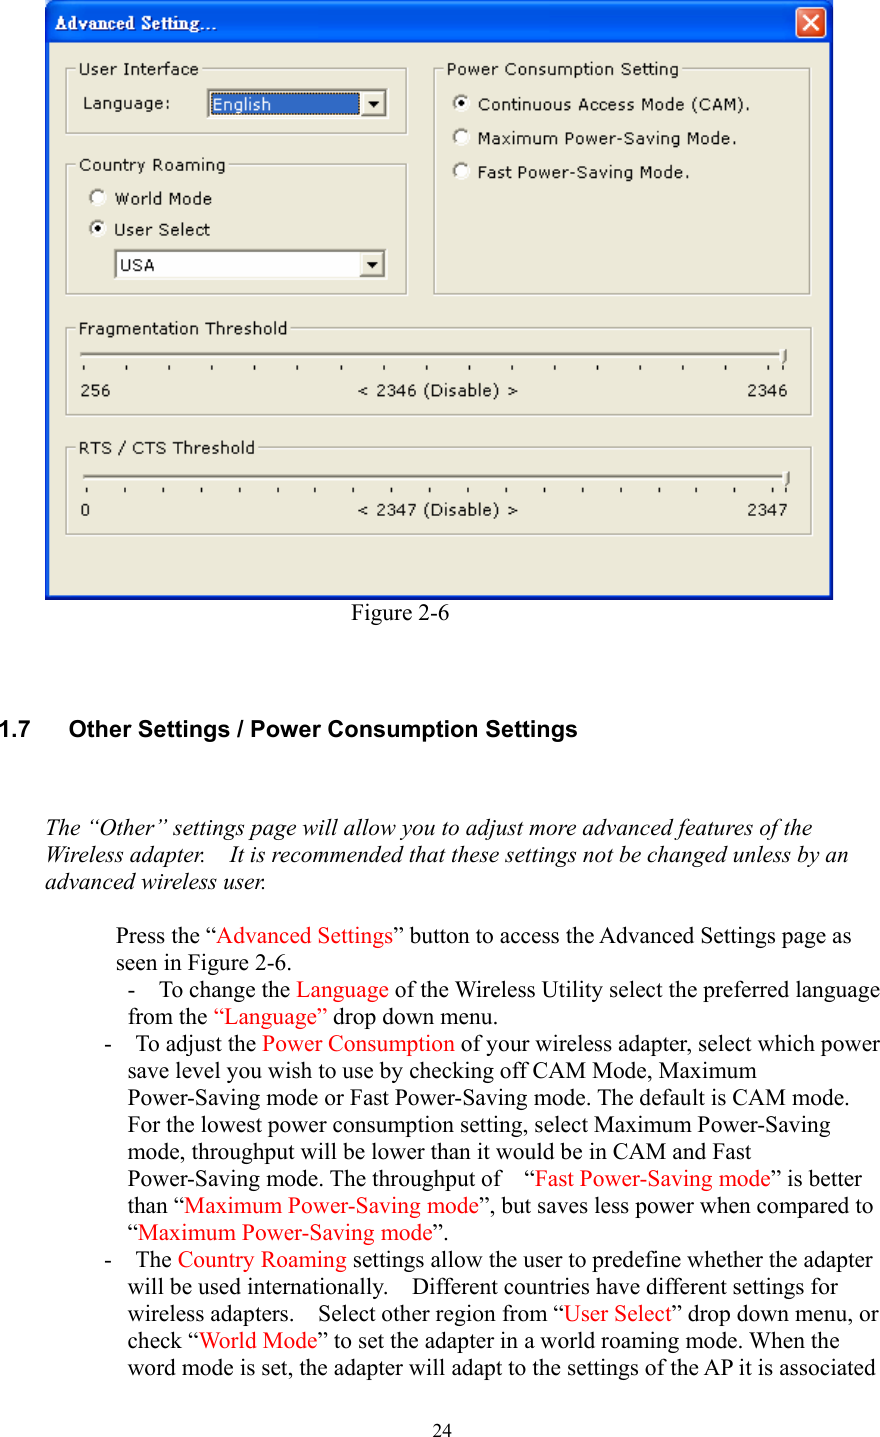  24                            Figure 2-6    1.7  Other Settings / Power Consumption Settings   The “Other” settings page will allow you to adjust more advanced features of the Wireless adapter.    It is recommended that these settings not be changed unless by an advanced wireless user.  Press the “Advanced Settings” button to access the Advanced Settings page as seen in Figure 2-6. -  To change the Language of the Wireless Utility select the preferred language from the “Language” drop down menu. -  To adjust the Power Consumption of your wireless adapter, select which power save level you wish to use by checking off CAM Mode, Maximum Power-Saving mode or Fast Power-Saving mode. The default is CAM mode. For the lowest power consumption setting, select Maximum Power-Saving mode, throughput will be lower than it would be in CAM and Fast Power-Saving mode. The throughput of    “Fast Power-Saving mode” is better than “Maximum Power-Saving mode”, but saves less power when compared to “Maximum Power-Saving mode”.  -  The Country Roaming settings allow the user to predefine whether the adapter will be used internationally.    Different countries have different settings for wireless adapters.  Select other region from “User Select” drop down menu, or check “World Mode” to set the adapter in a world roaming mode. When the word mode is set, the adapter will adapt to the settings of the AP it is associated 